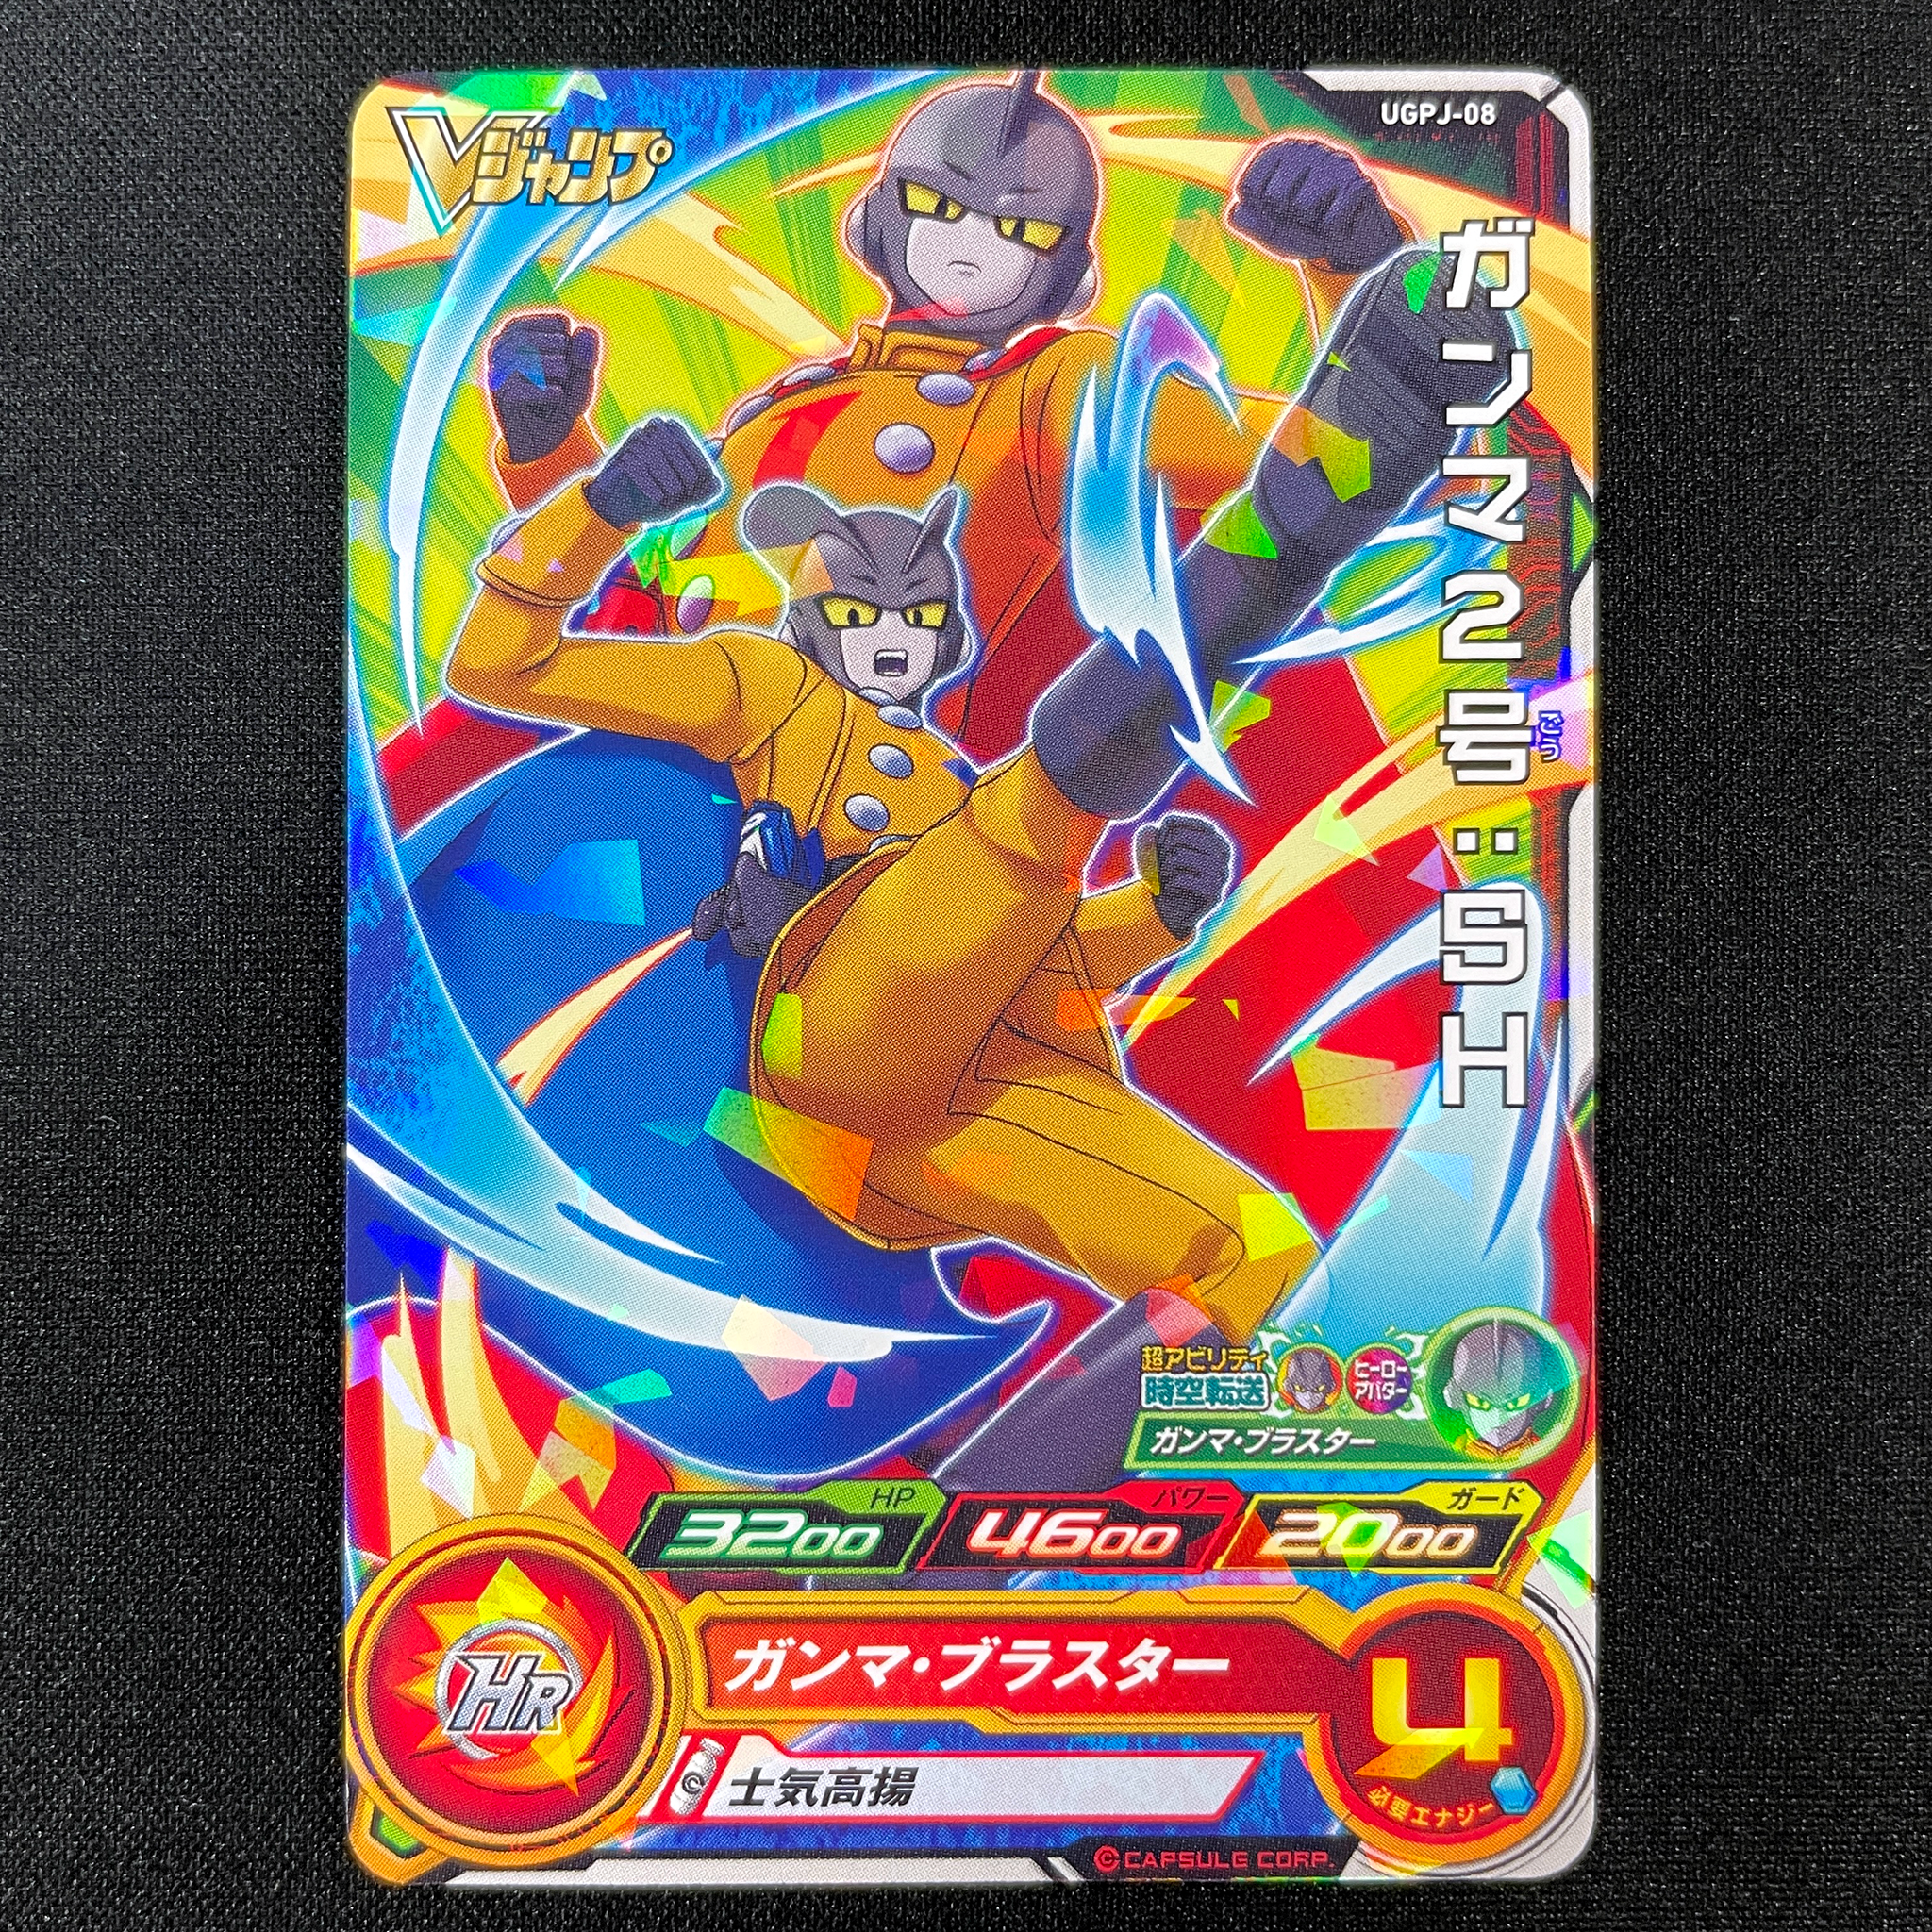 SUPER DRAGON BALL HEROES UGPJ-08  Promotional card sold with the June 2022 issue of V Jump magazine released May 20 2022.  Ganma 2 : SH